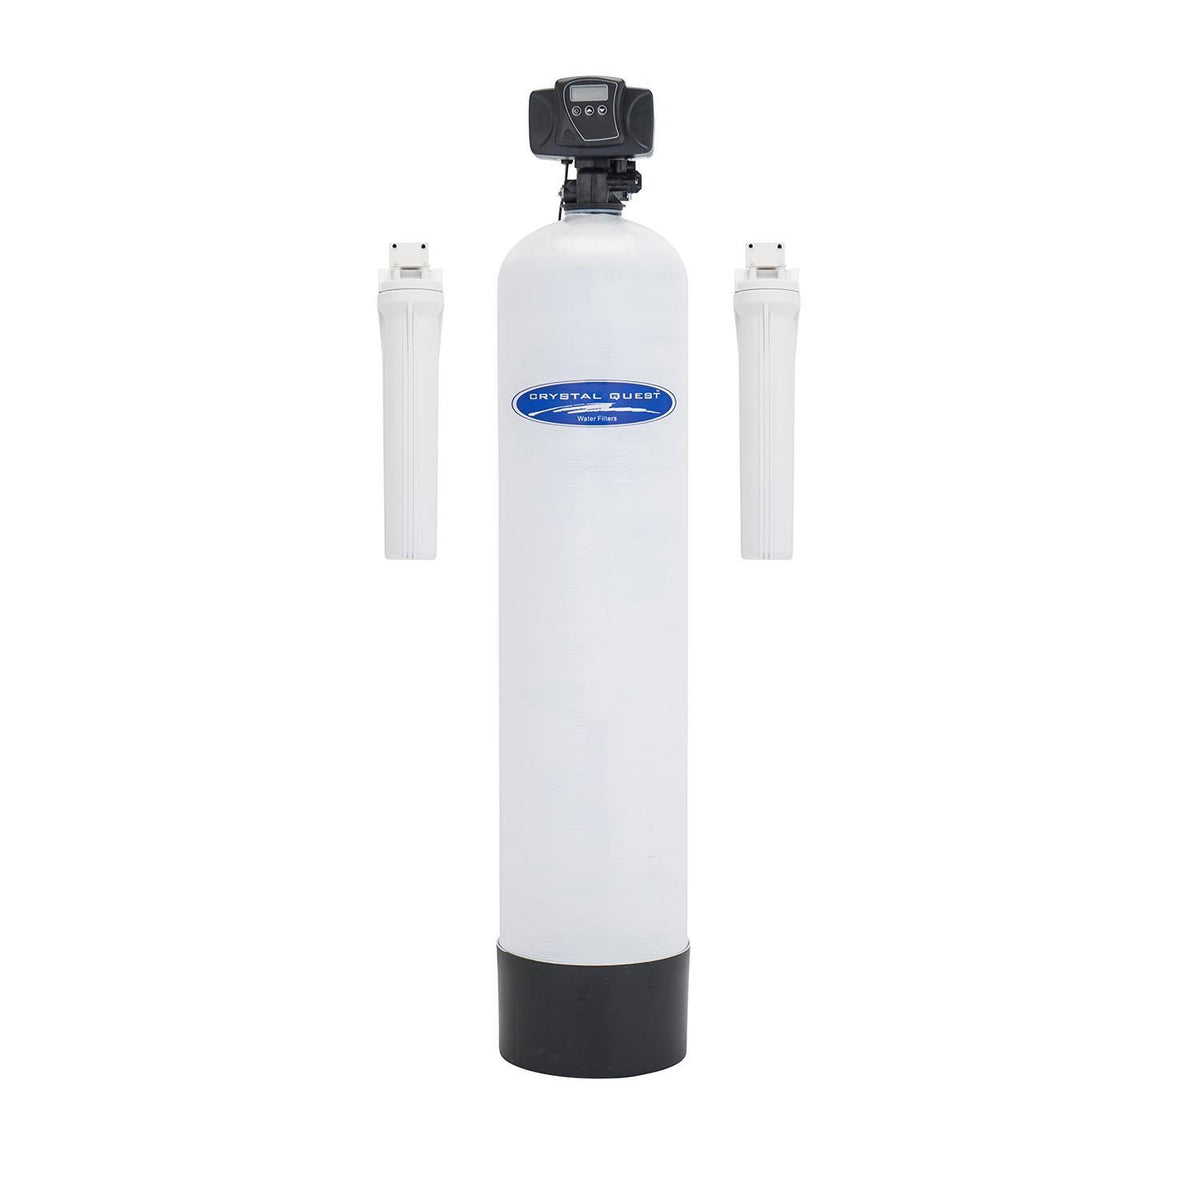 Turbidity Whole House Water Filter - Whole House Water Filters - Crystal Quest Water Filters